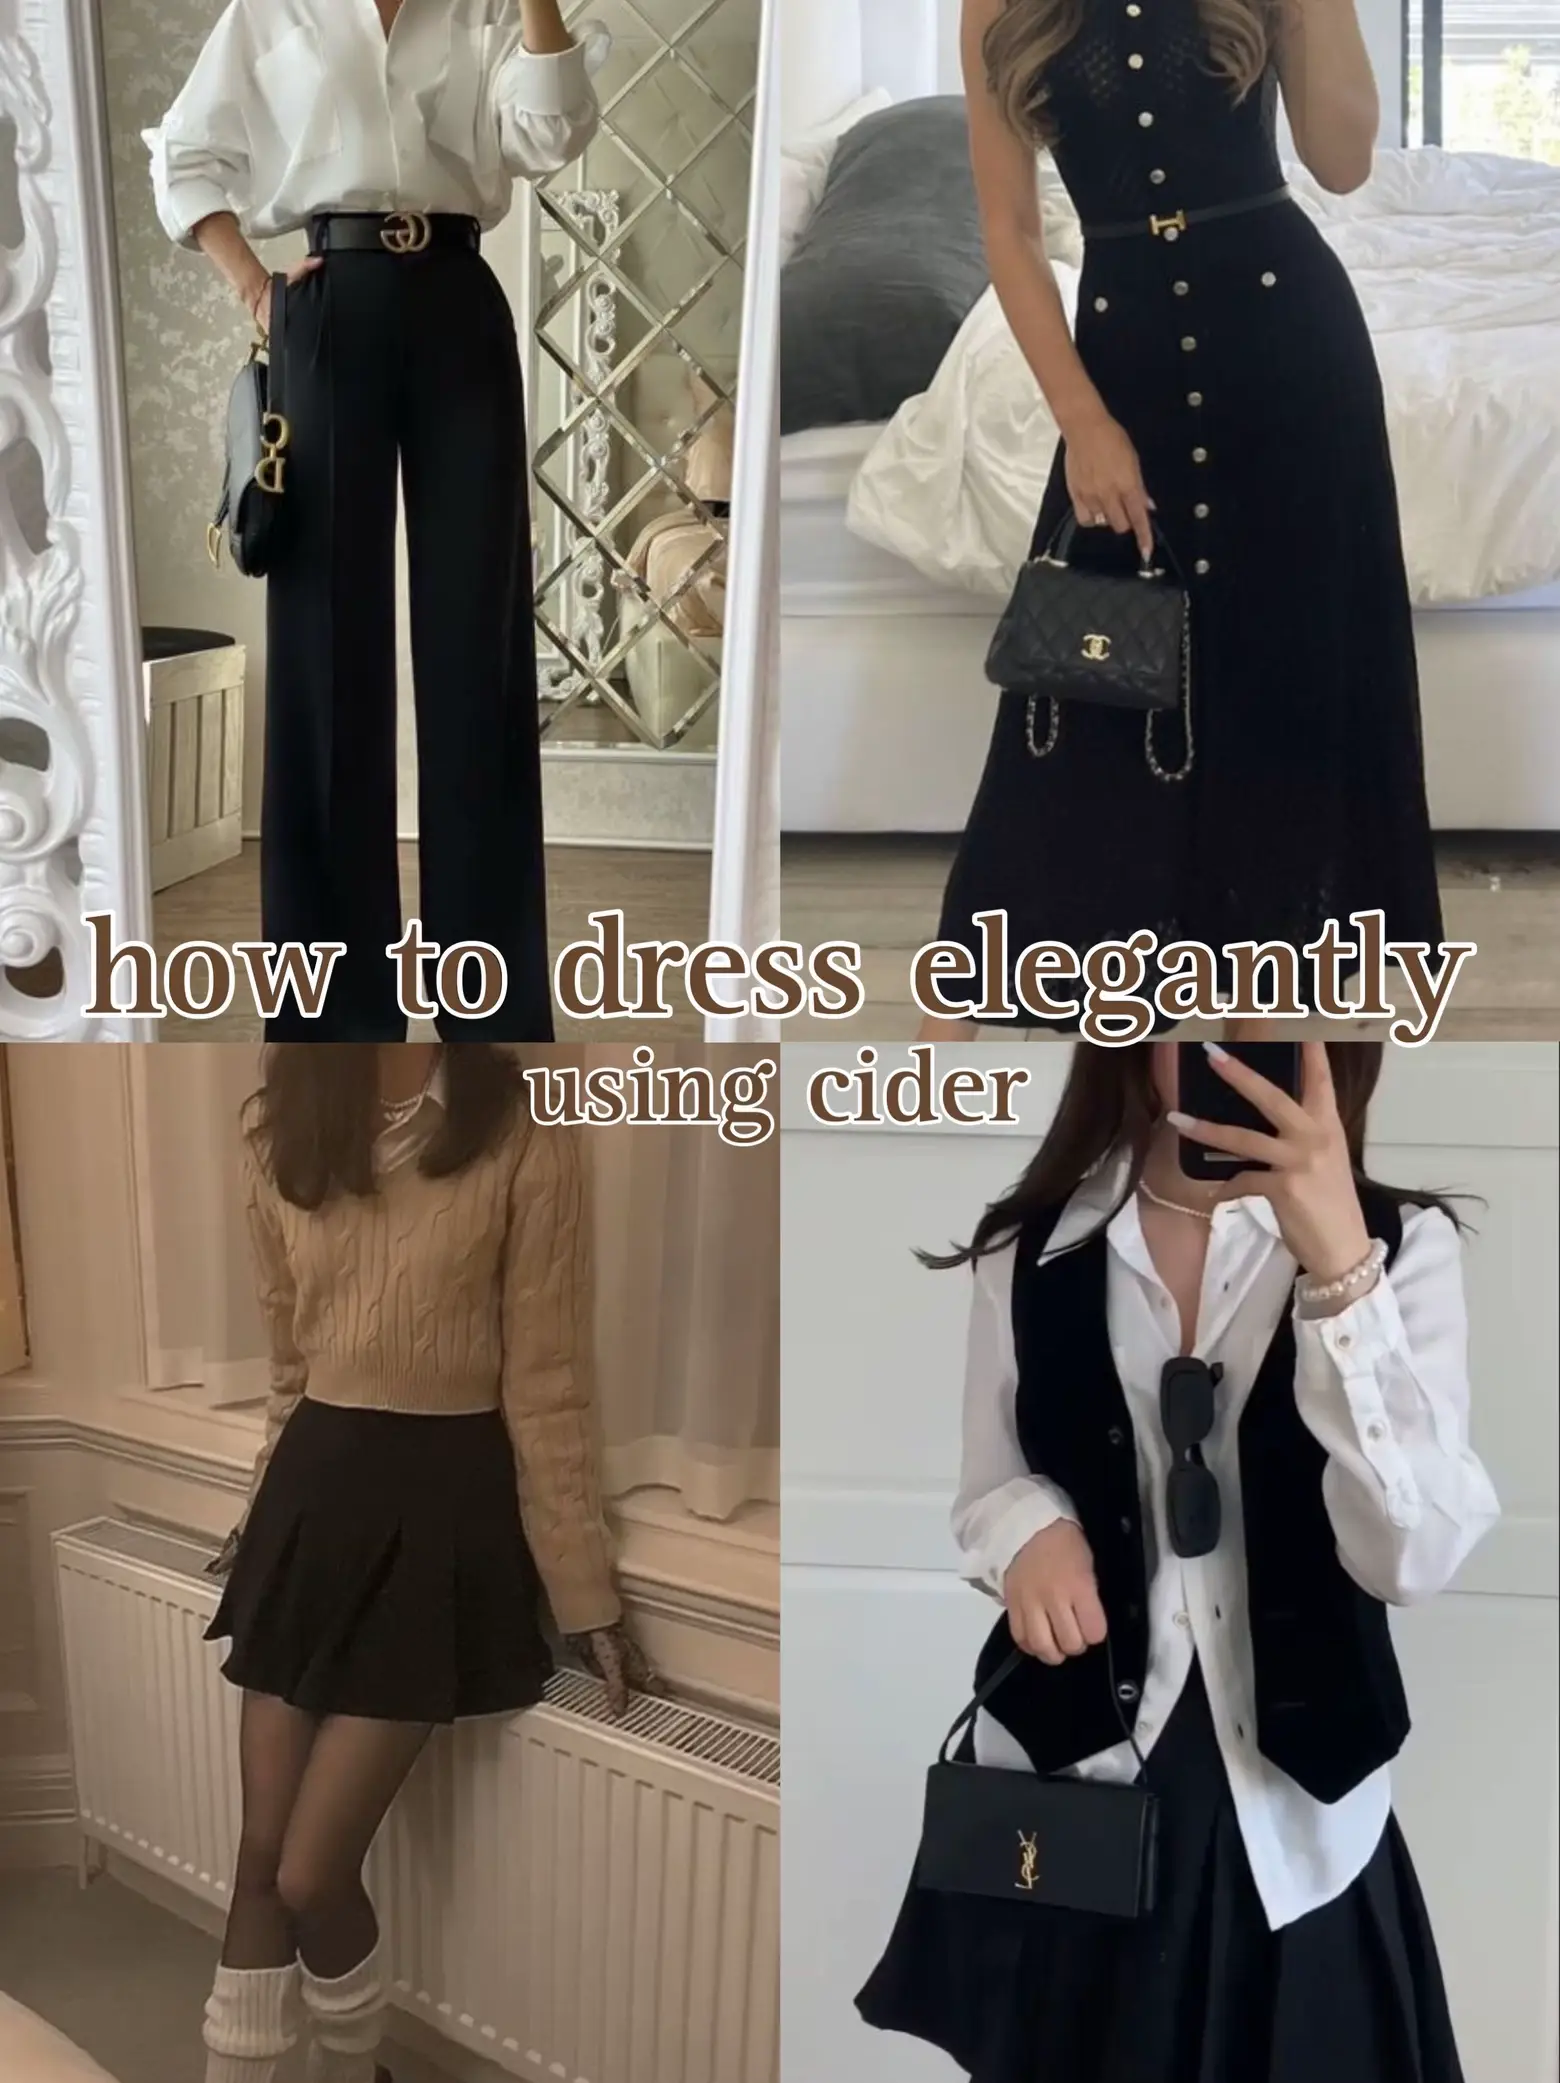 19 top Classy Outfits ideas in 2024